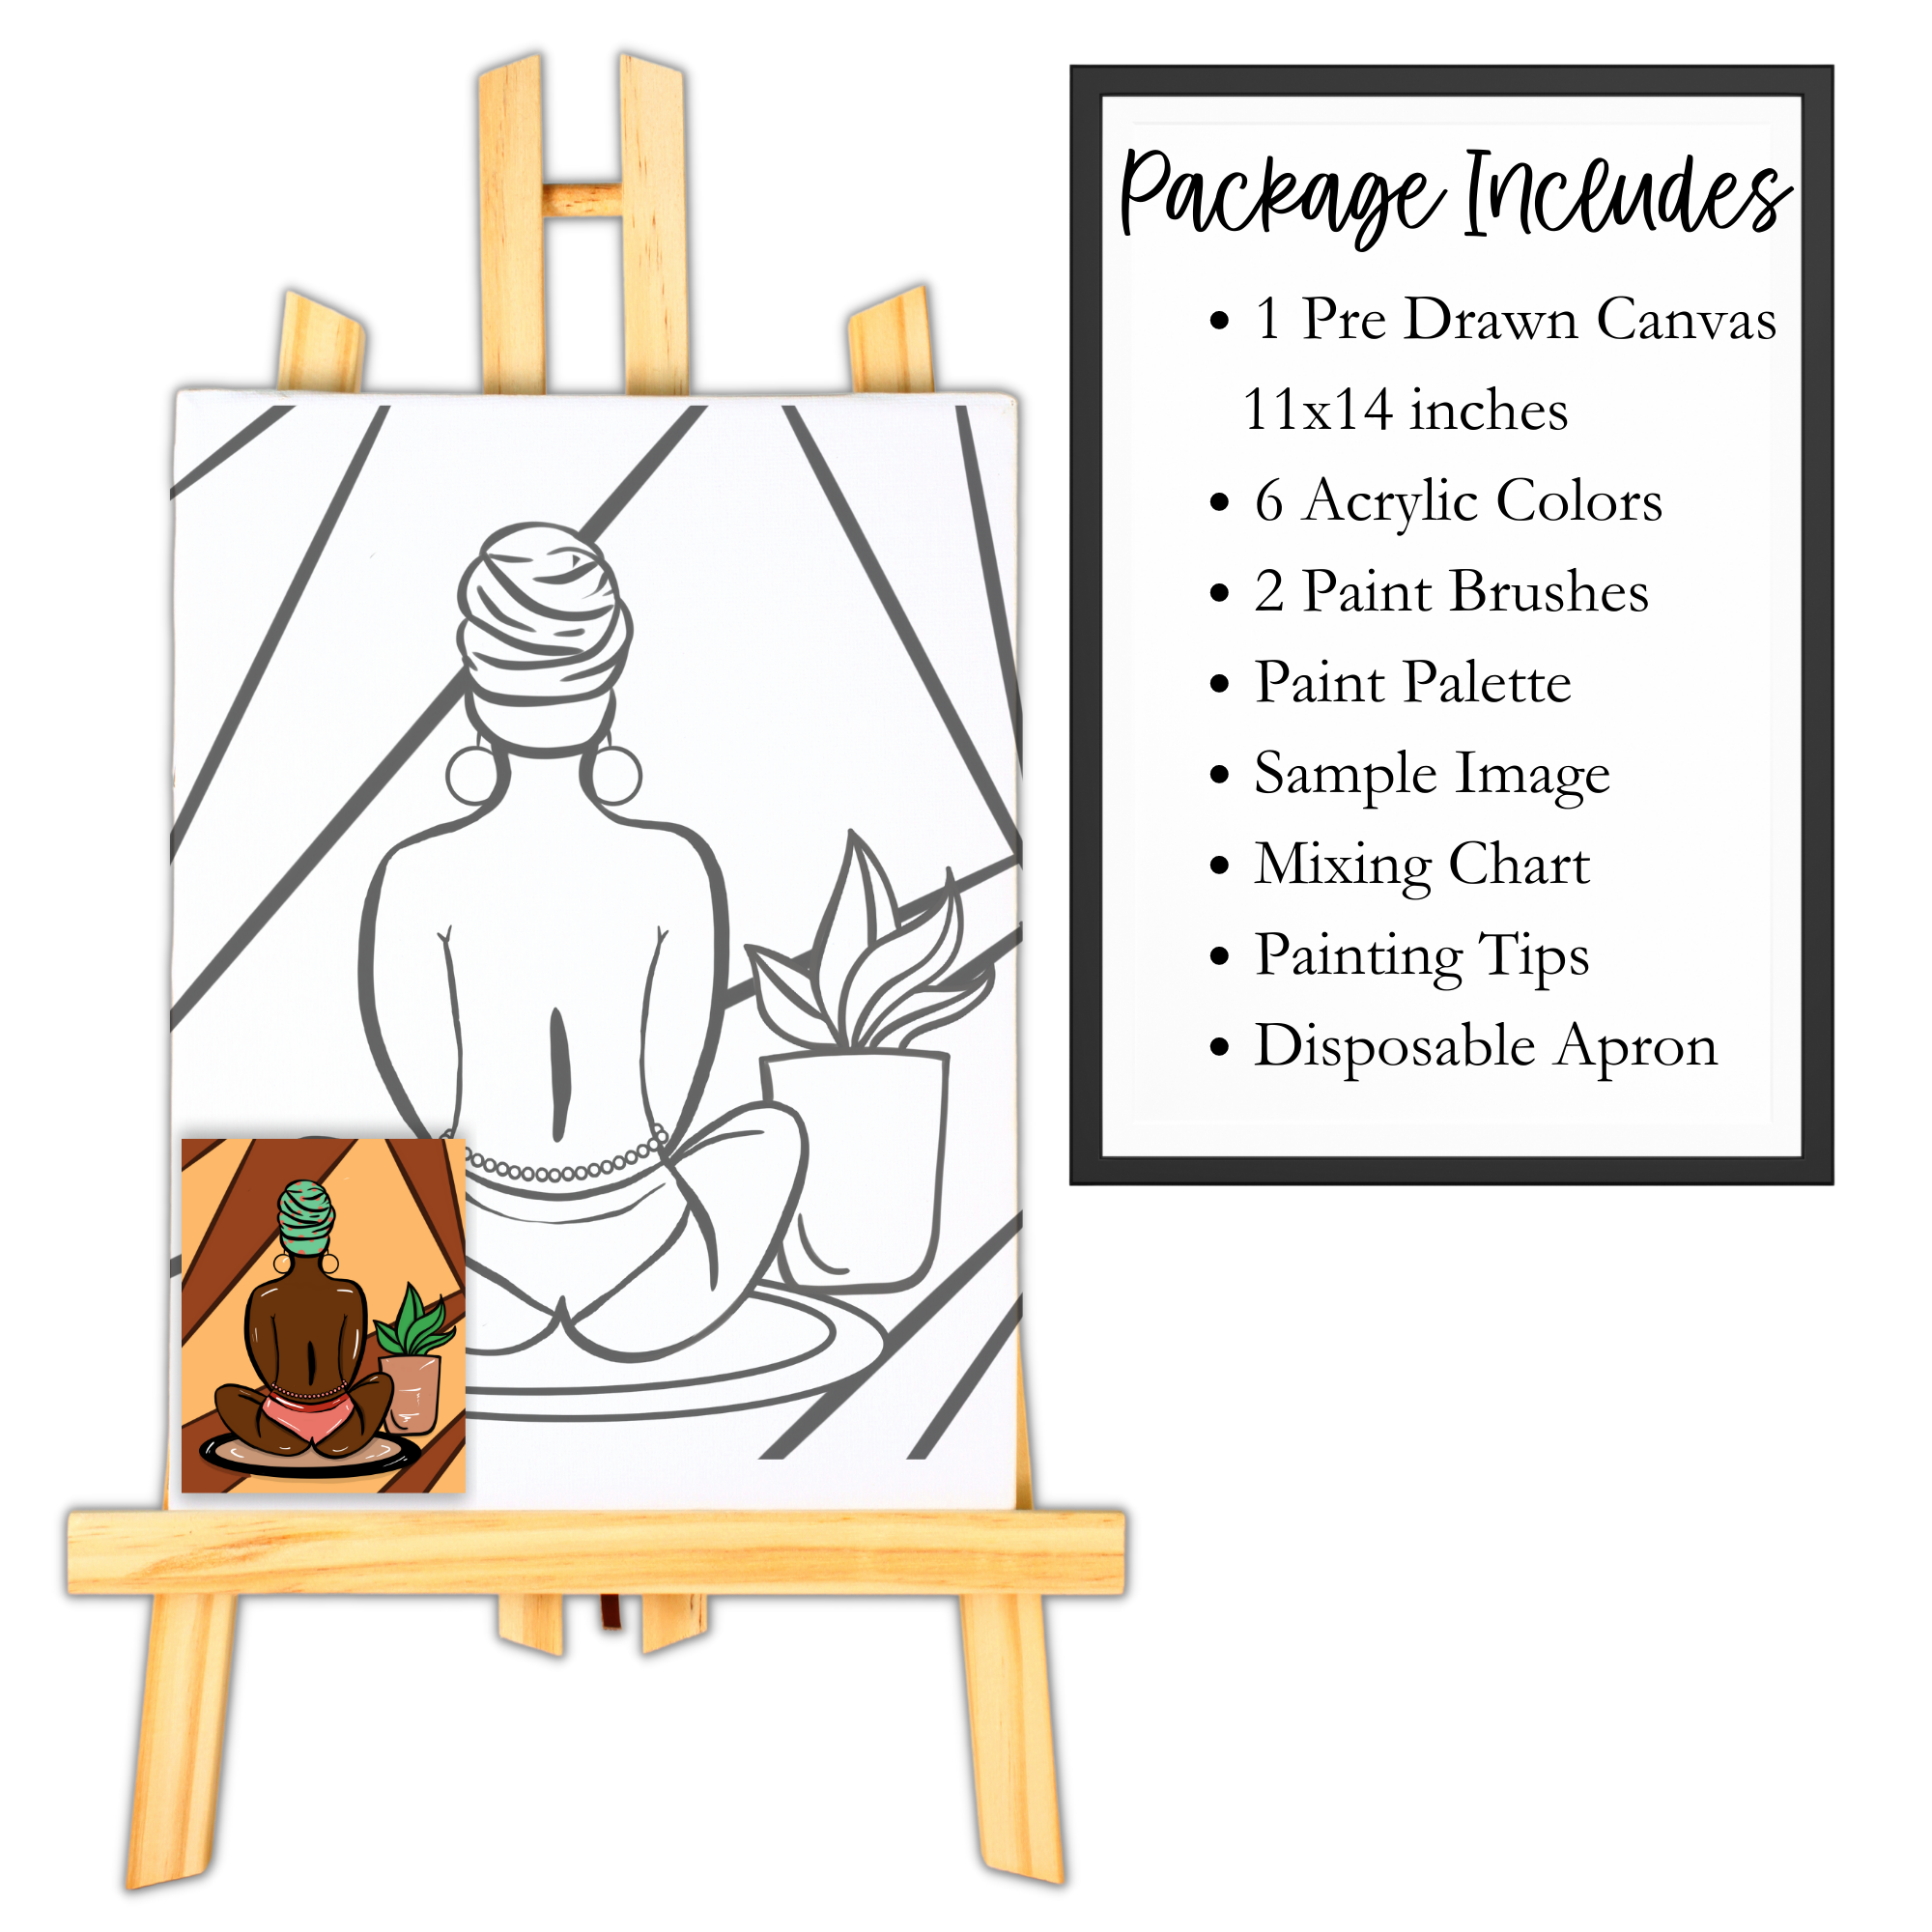 2 Pack Canvas Painting Kits Pre Drawn Canvas for Painting for